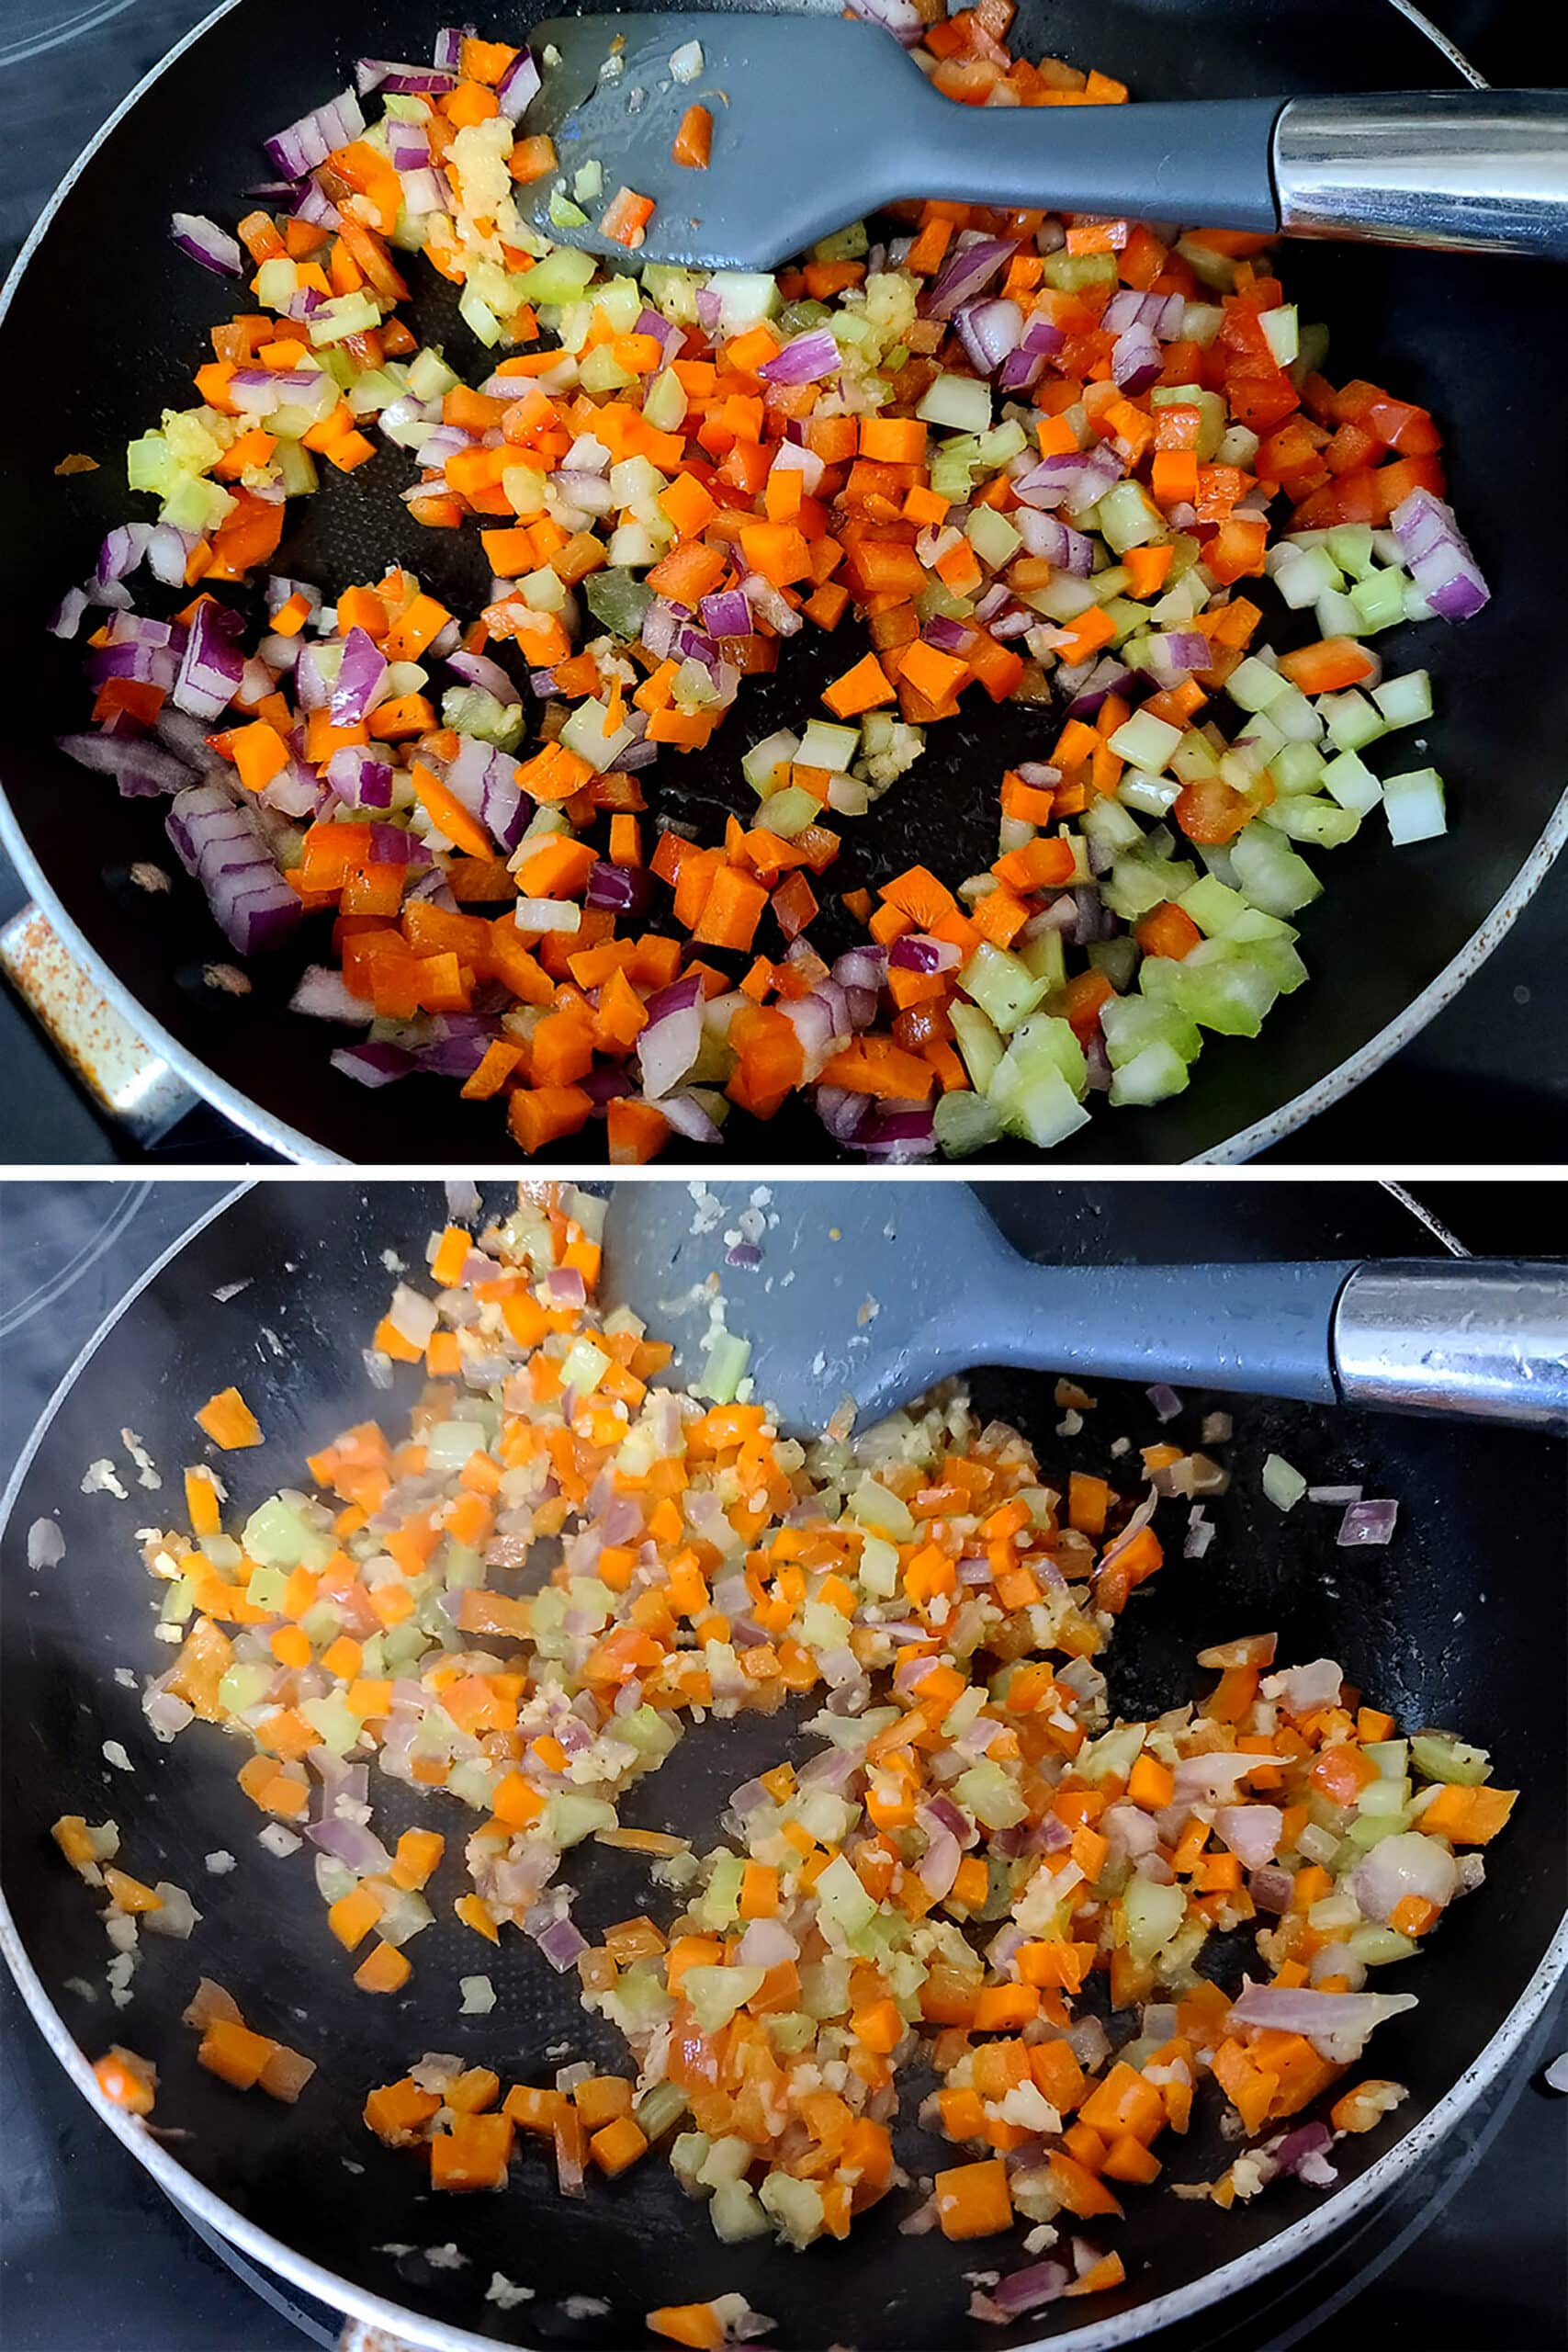 A 2 part image showing the chopped vegetables being cooked in a nonstick pan.